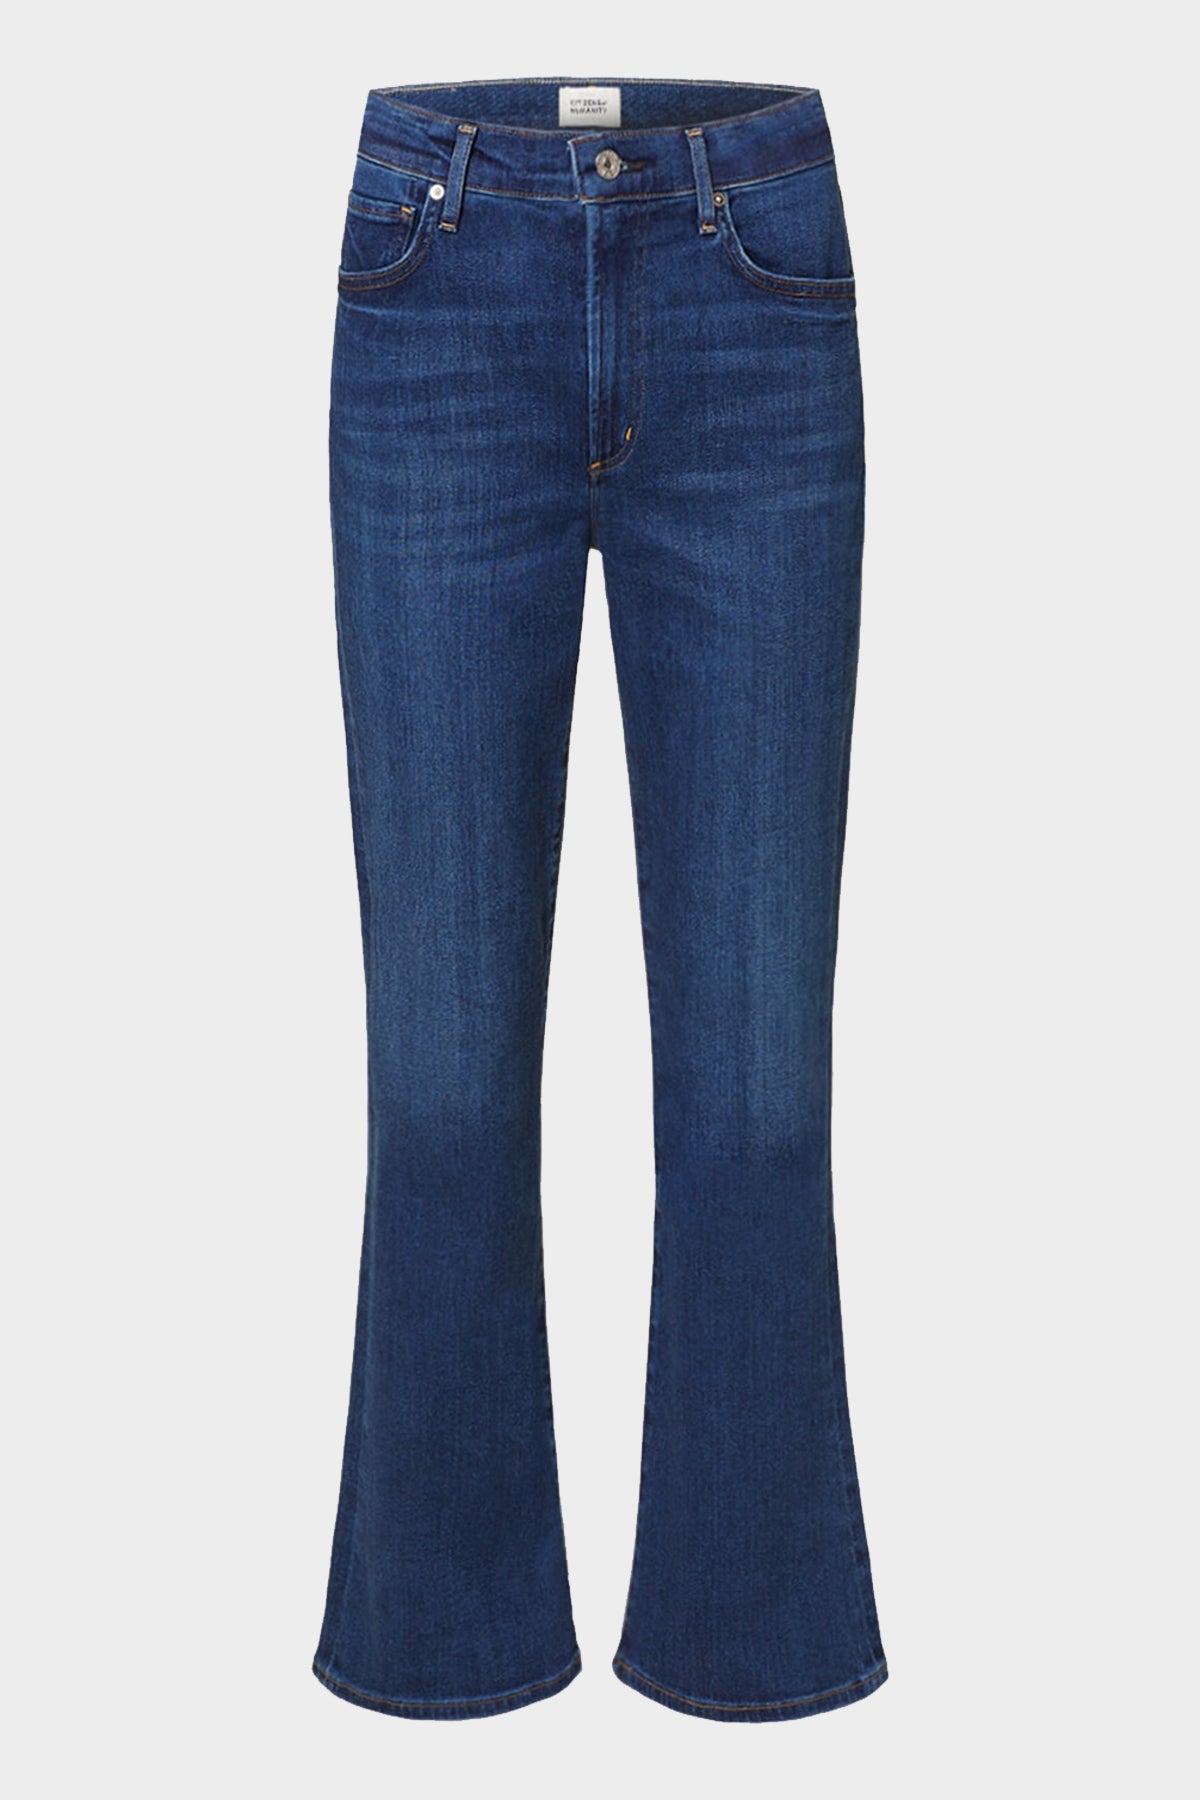 Lilah High Rise Bootcut 30" Jean in Provance - shop-olivia.com